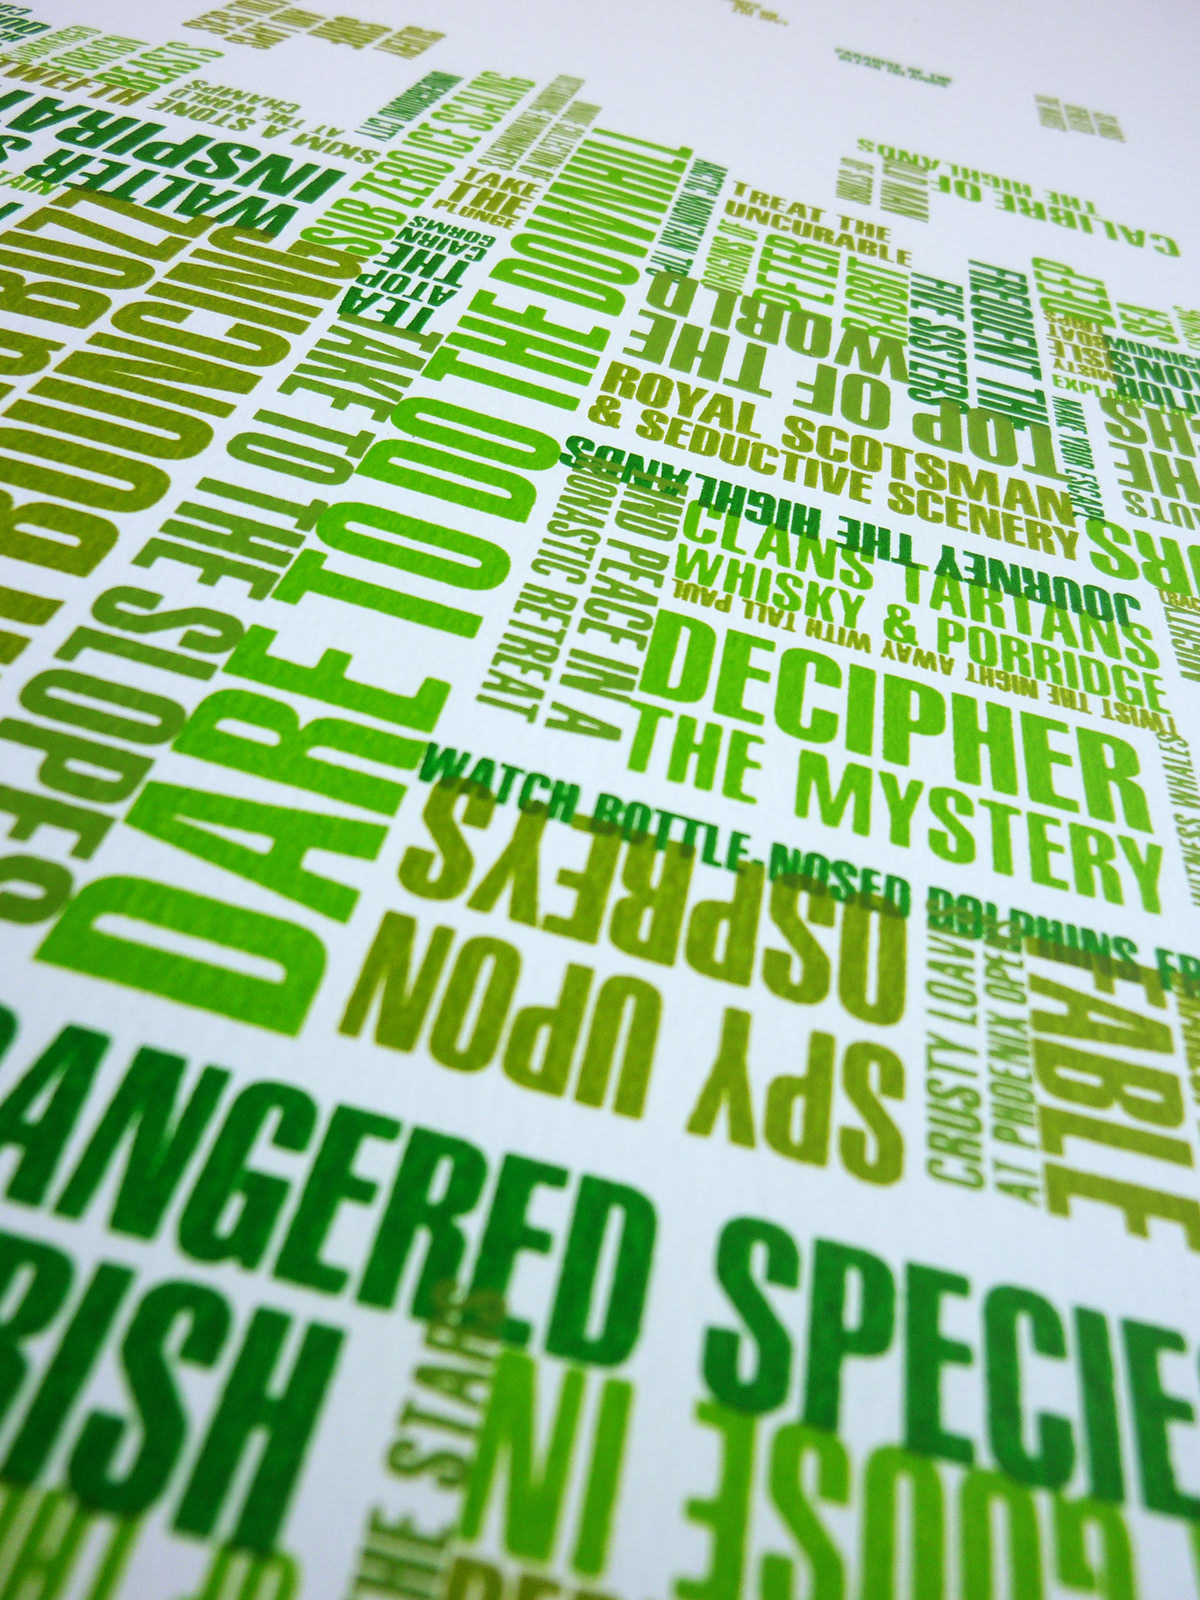 Staycation great britain britain UK United Kingdom  scotland wales Northern Ireland england typography   green silkscreen silk screen screenprint screen print print evocative places Geography words Holiday Web Design  animation  Website Moving Image poster Advertising  vacation Europe Recession Budget Promotion tradition culture heritage activities adventure doorstep   colour color